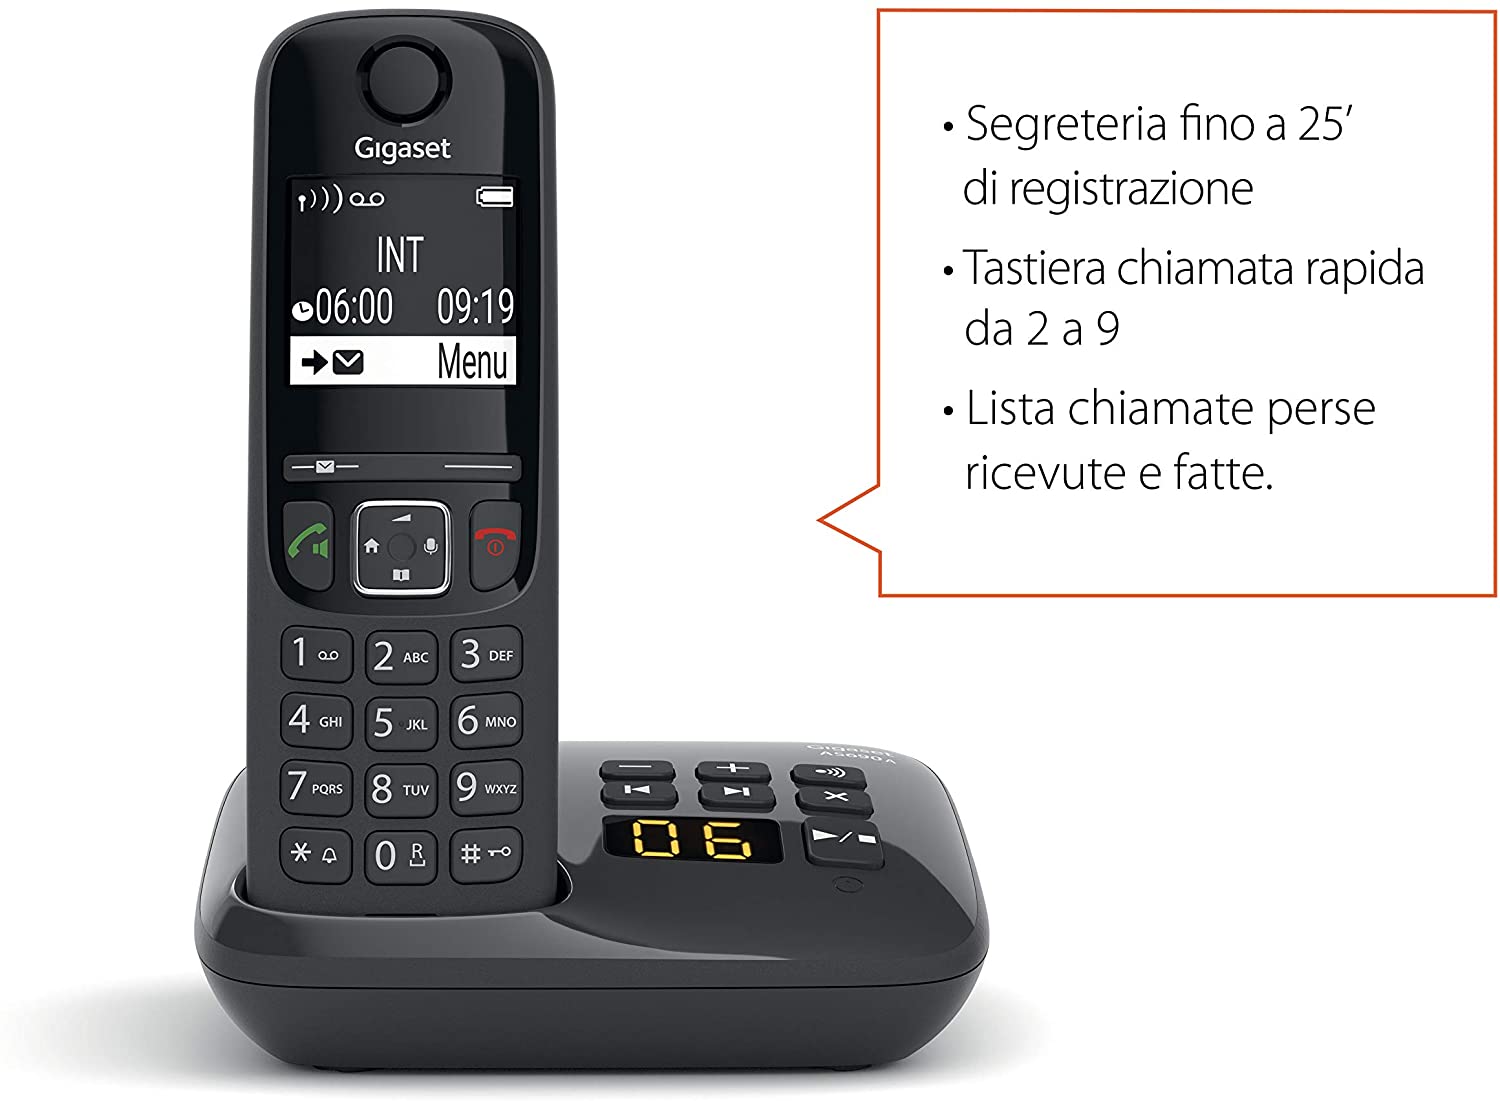 Gigaset AS690A Duo Cordless Telephone High Quality Handsfree Illuminated Keypad Large Display List of Made Received Missed Calls